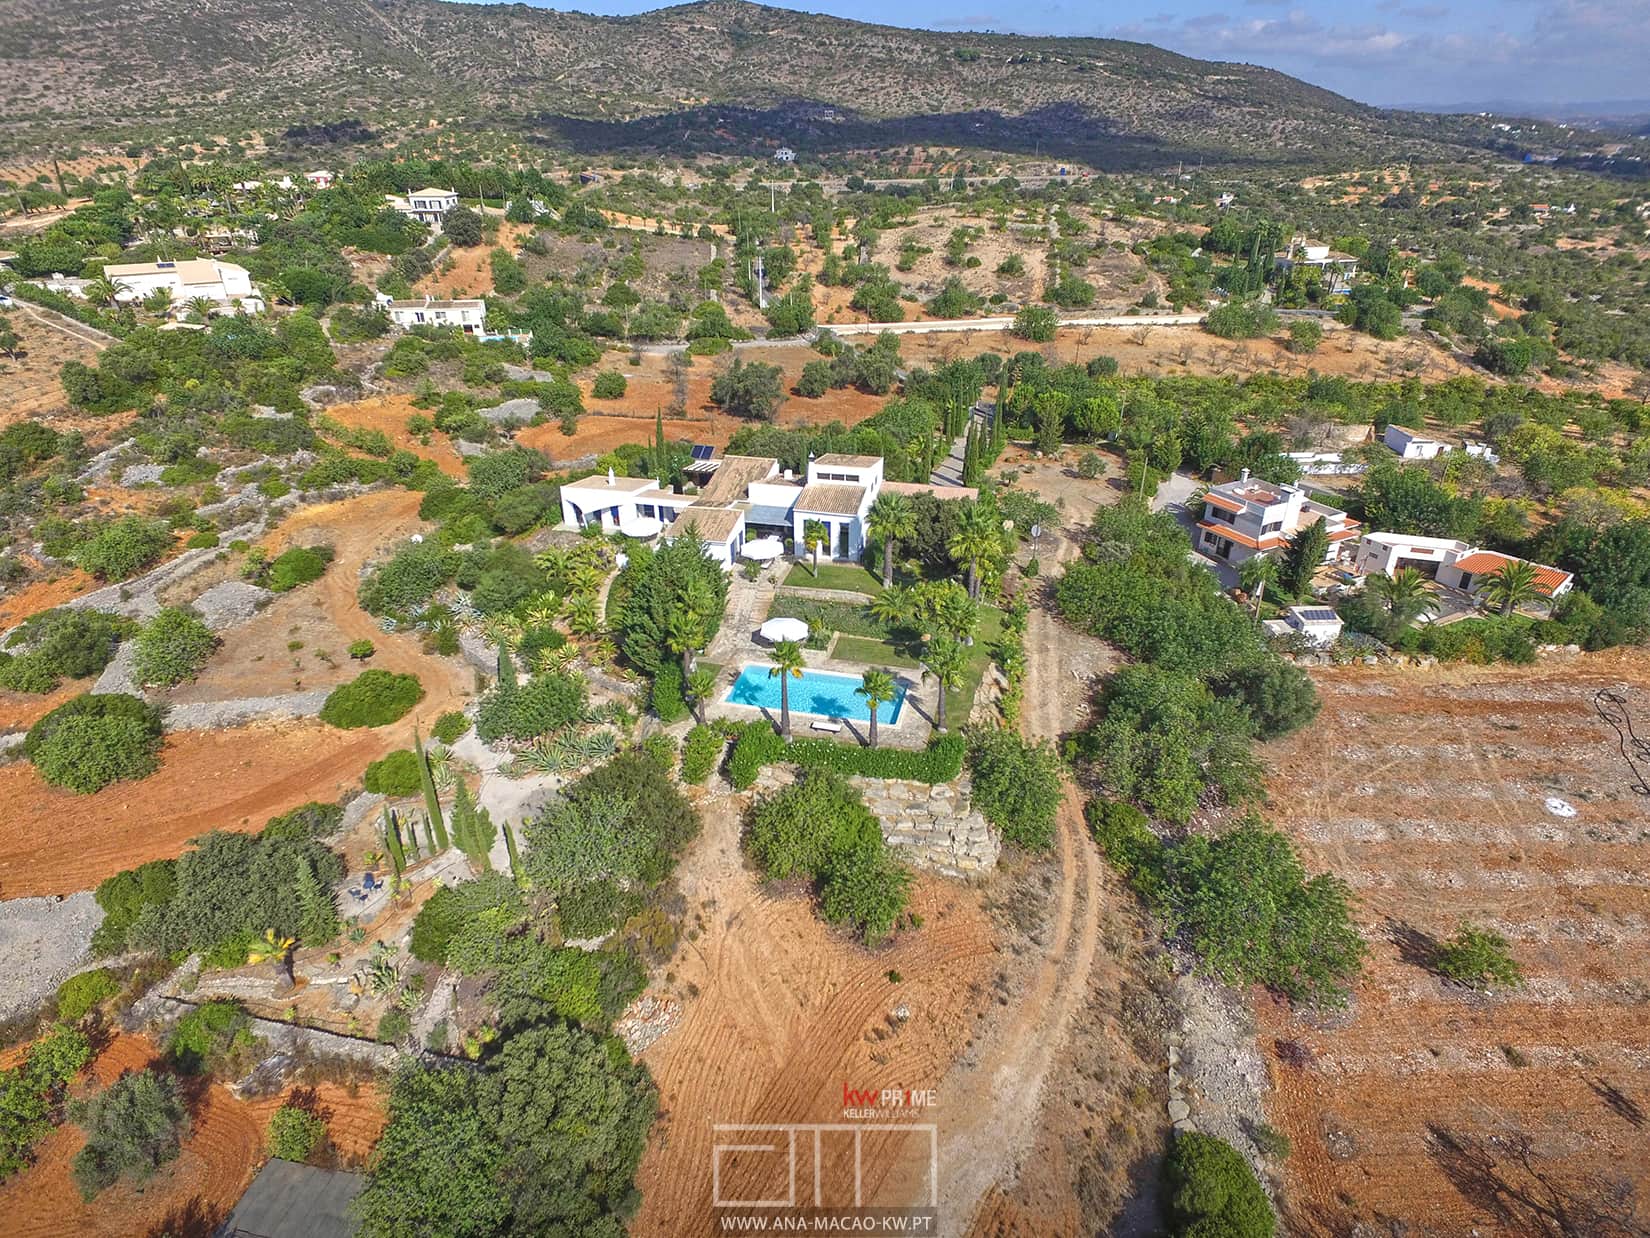 Aerial view of land and house